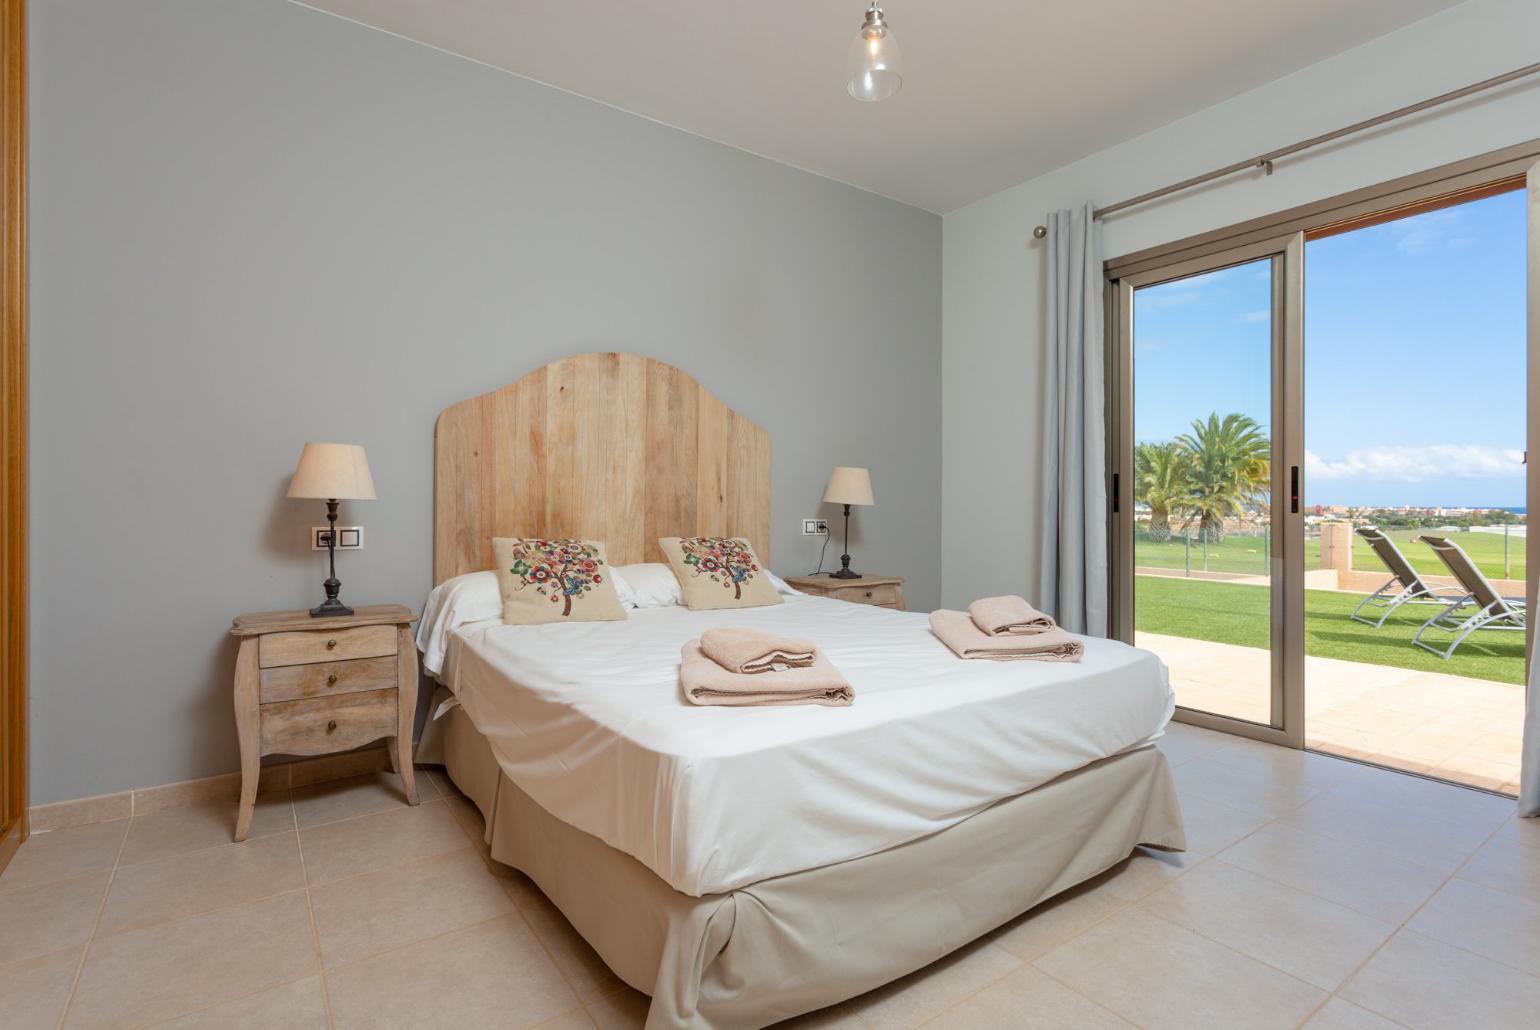 Double bedroom with en suite bathroom and pool terrace access